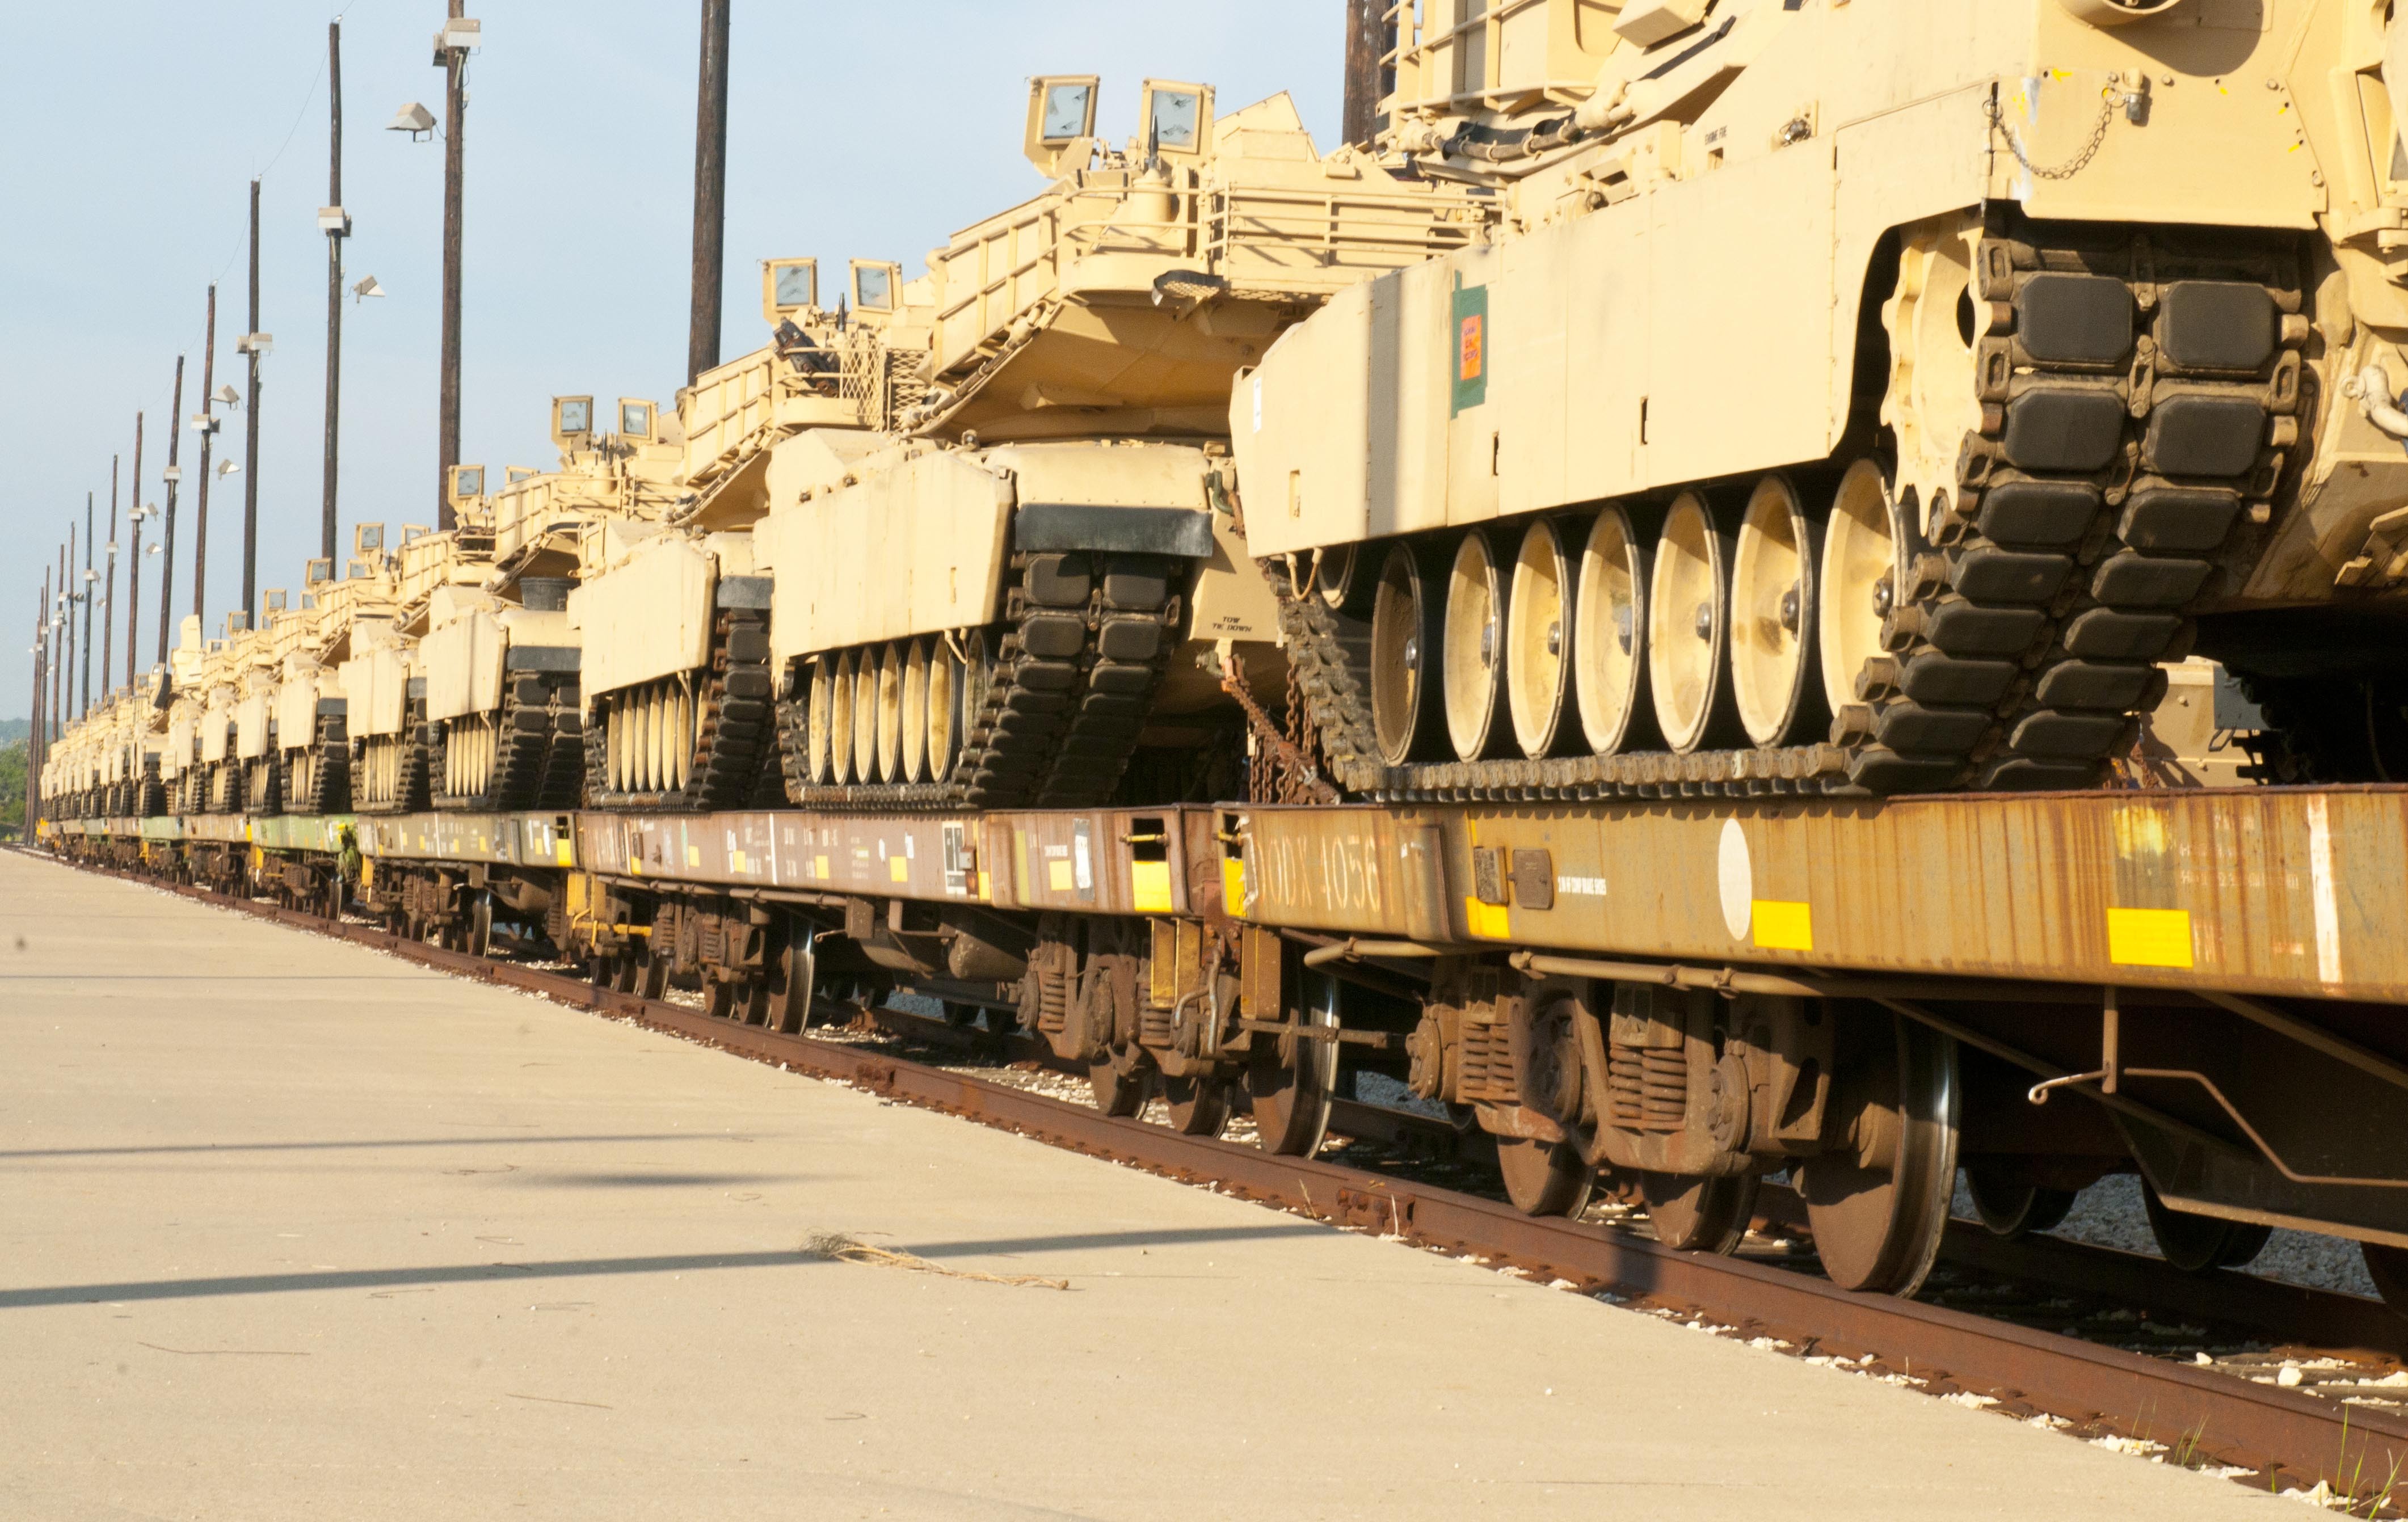 how much gas military tanks does the us have